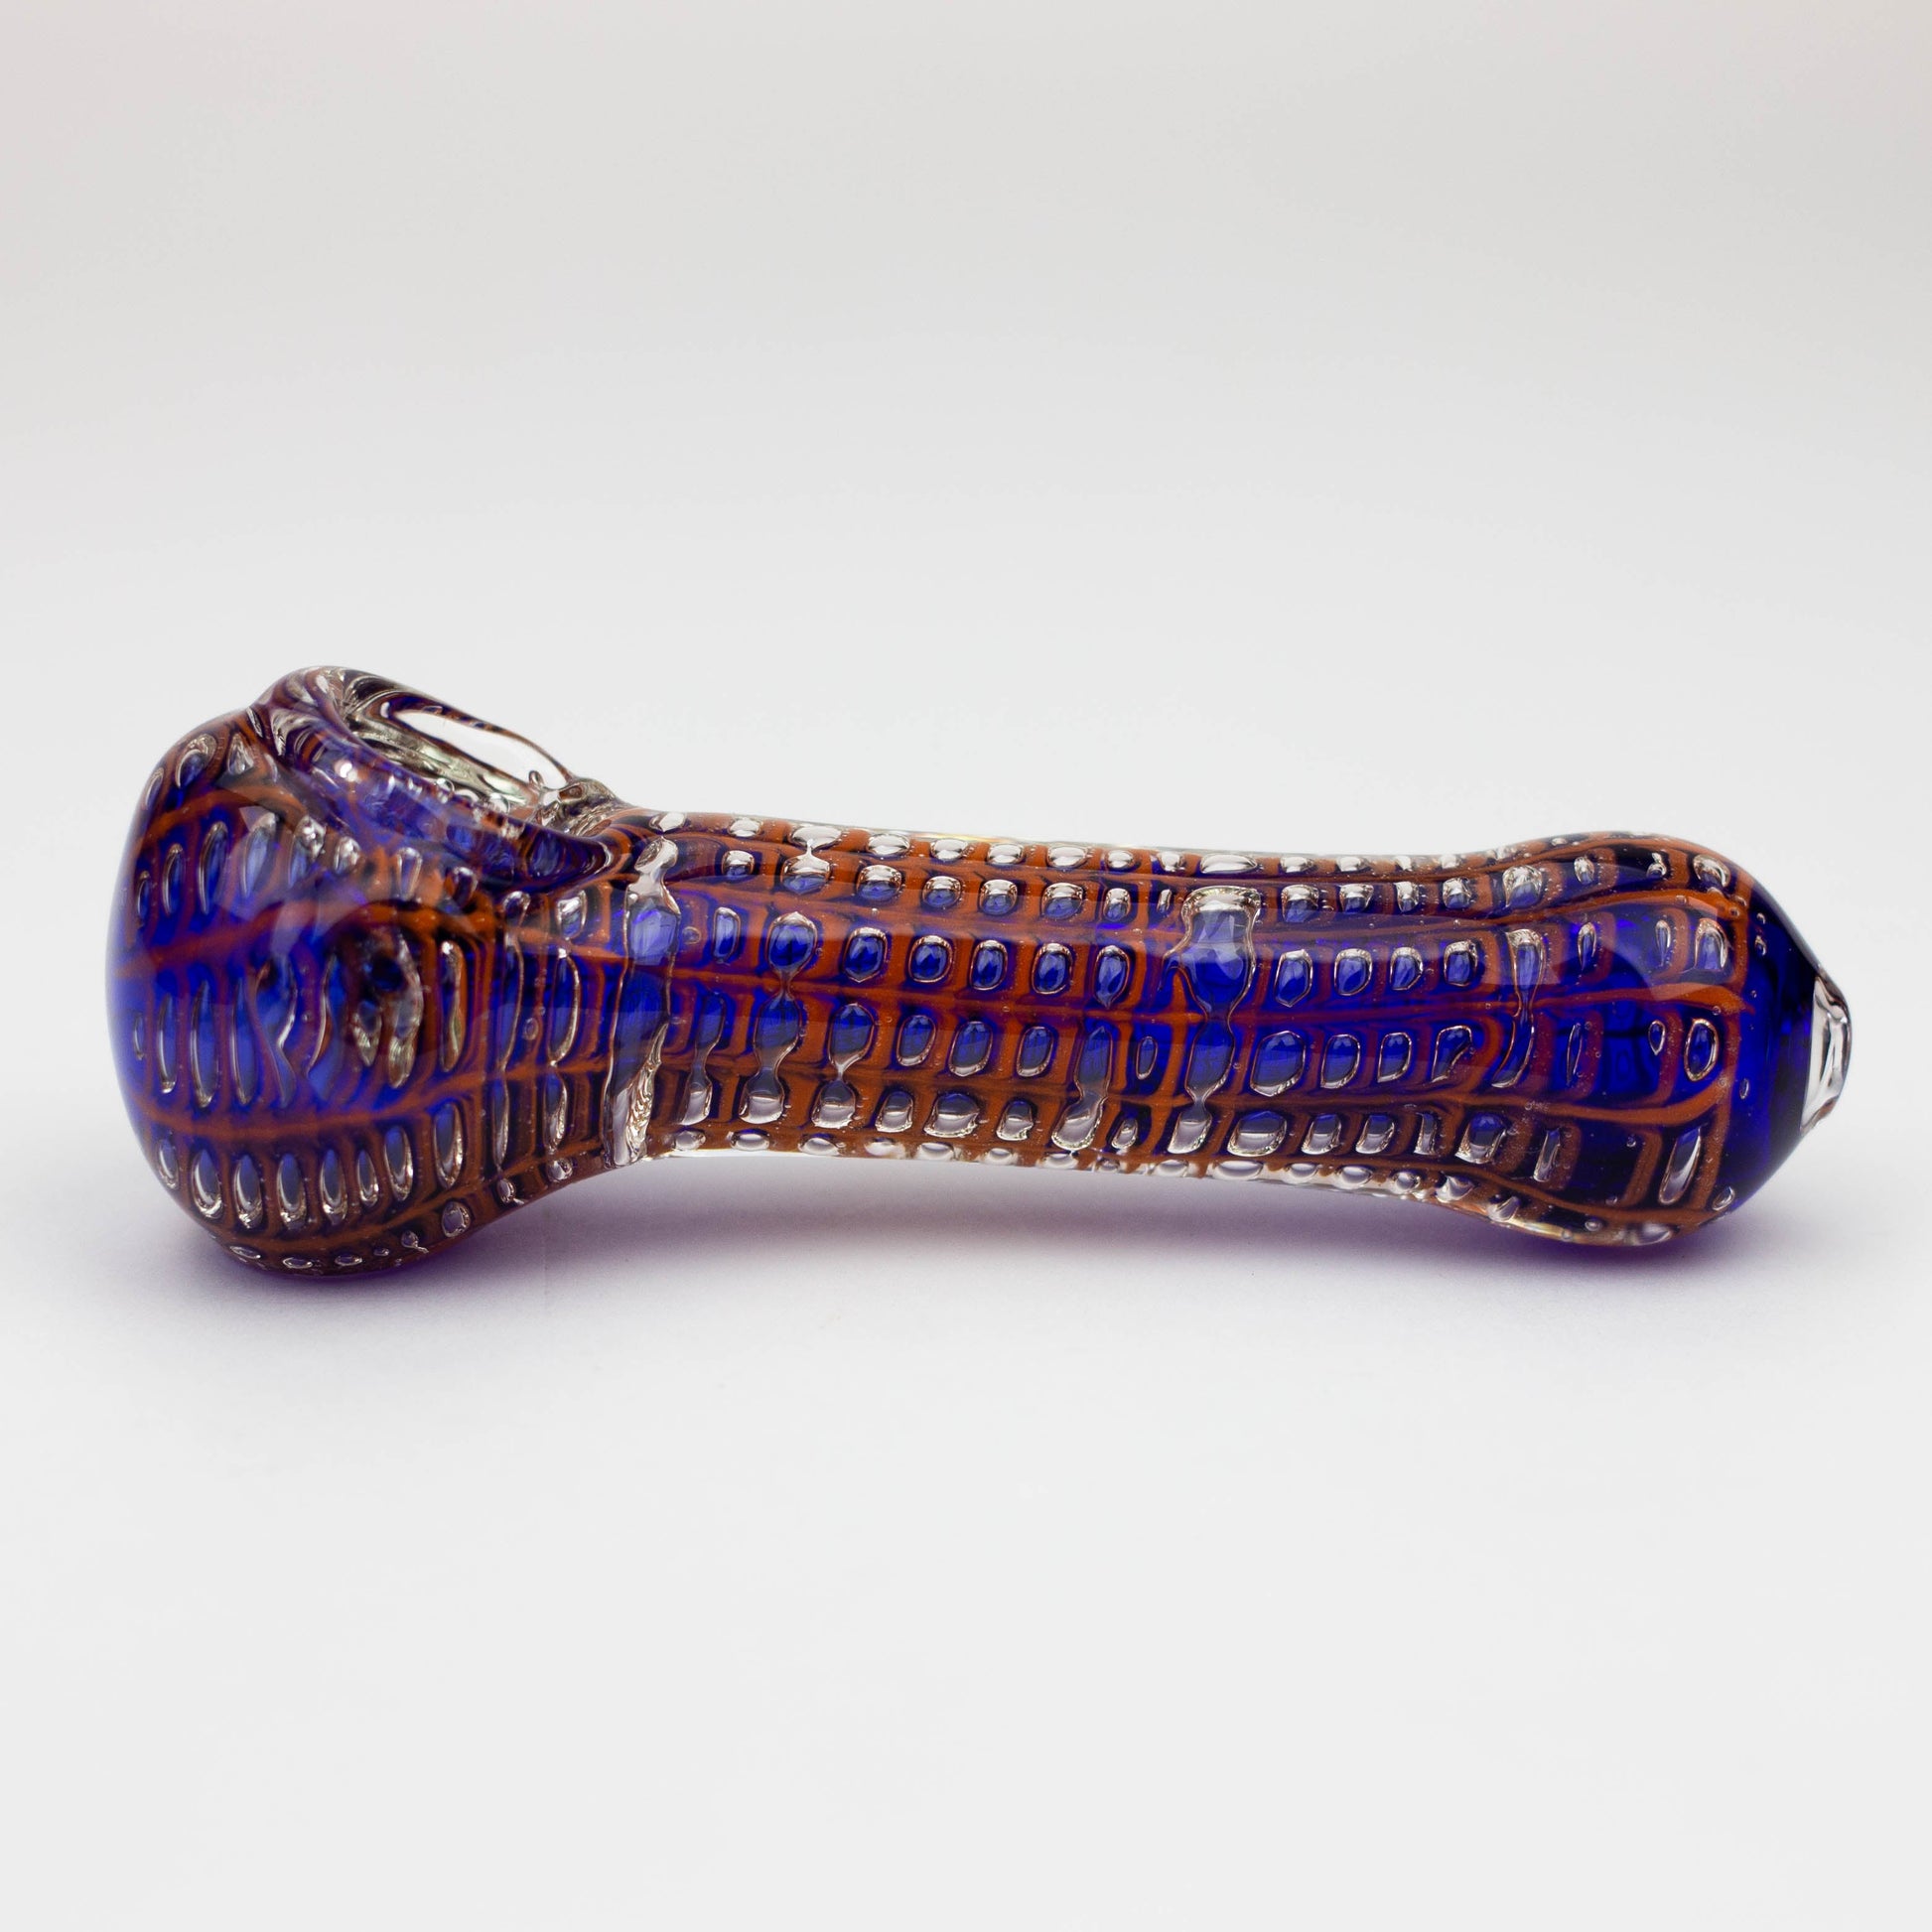 5" Spider web glass hand pipe_5